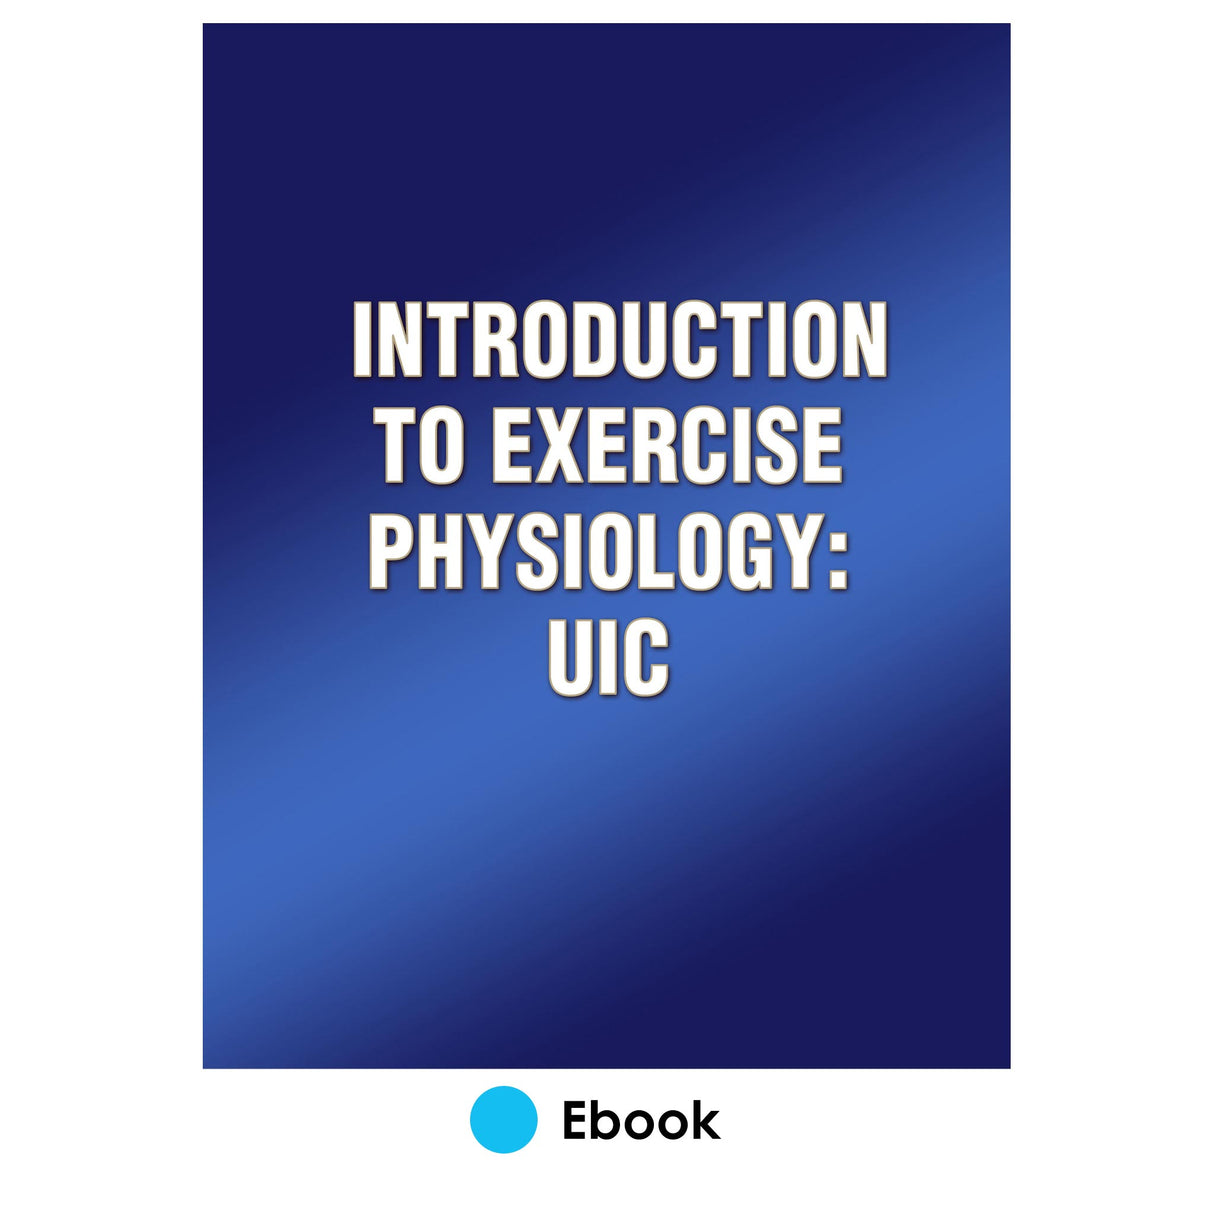 Introduction to Exercise Physiology: UIC